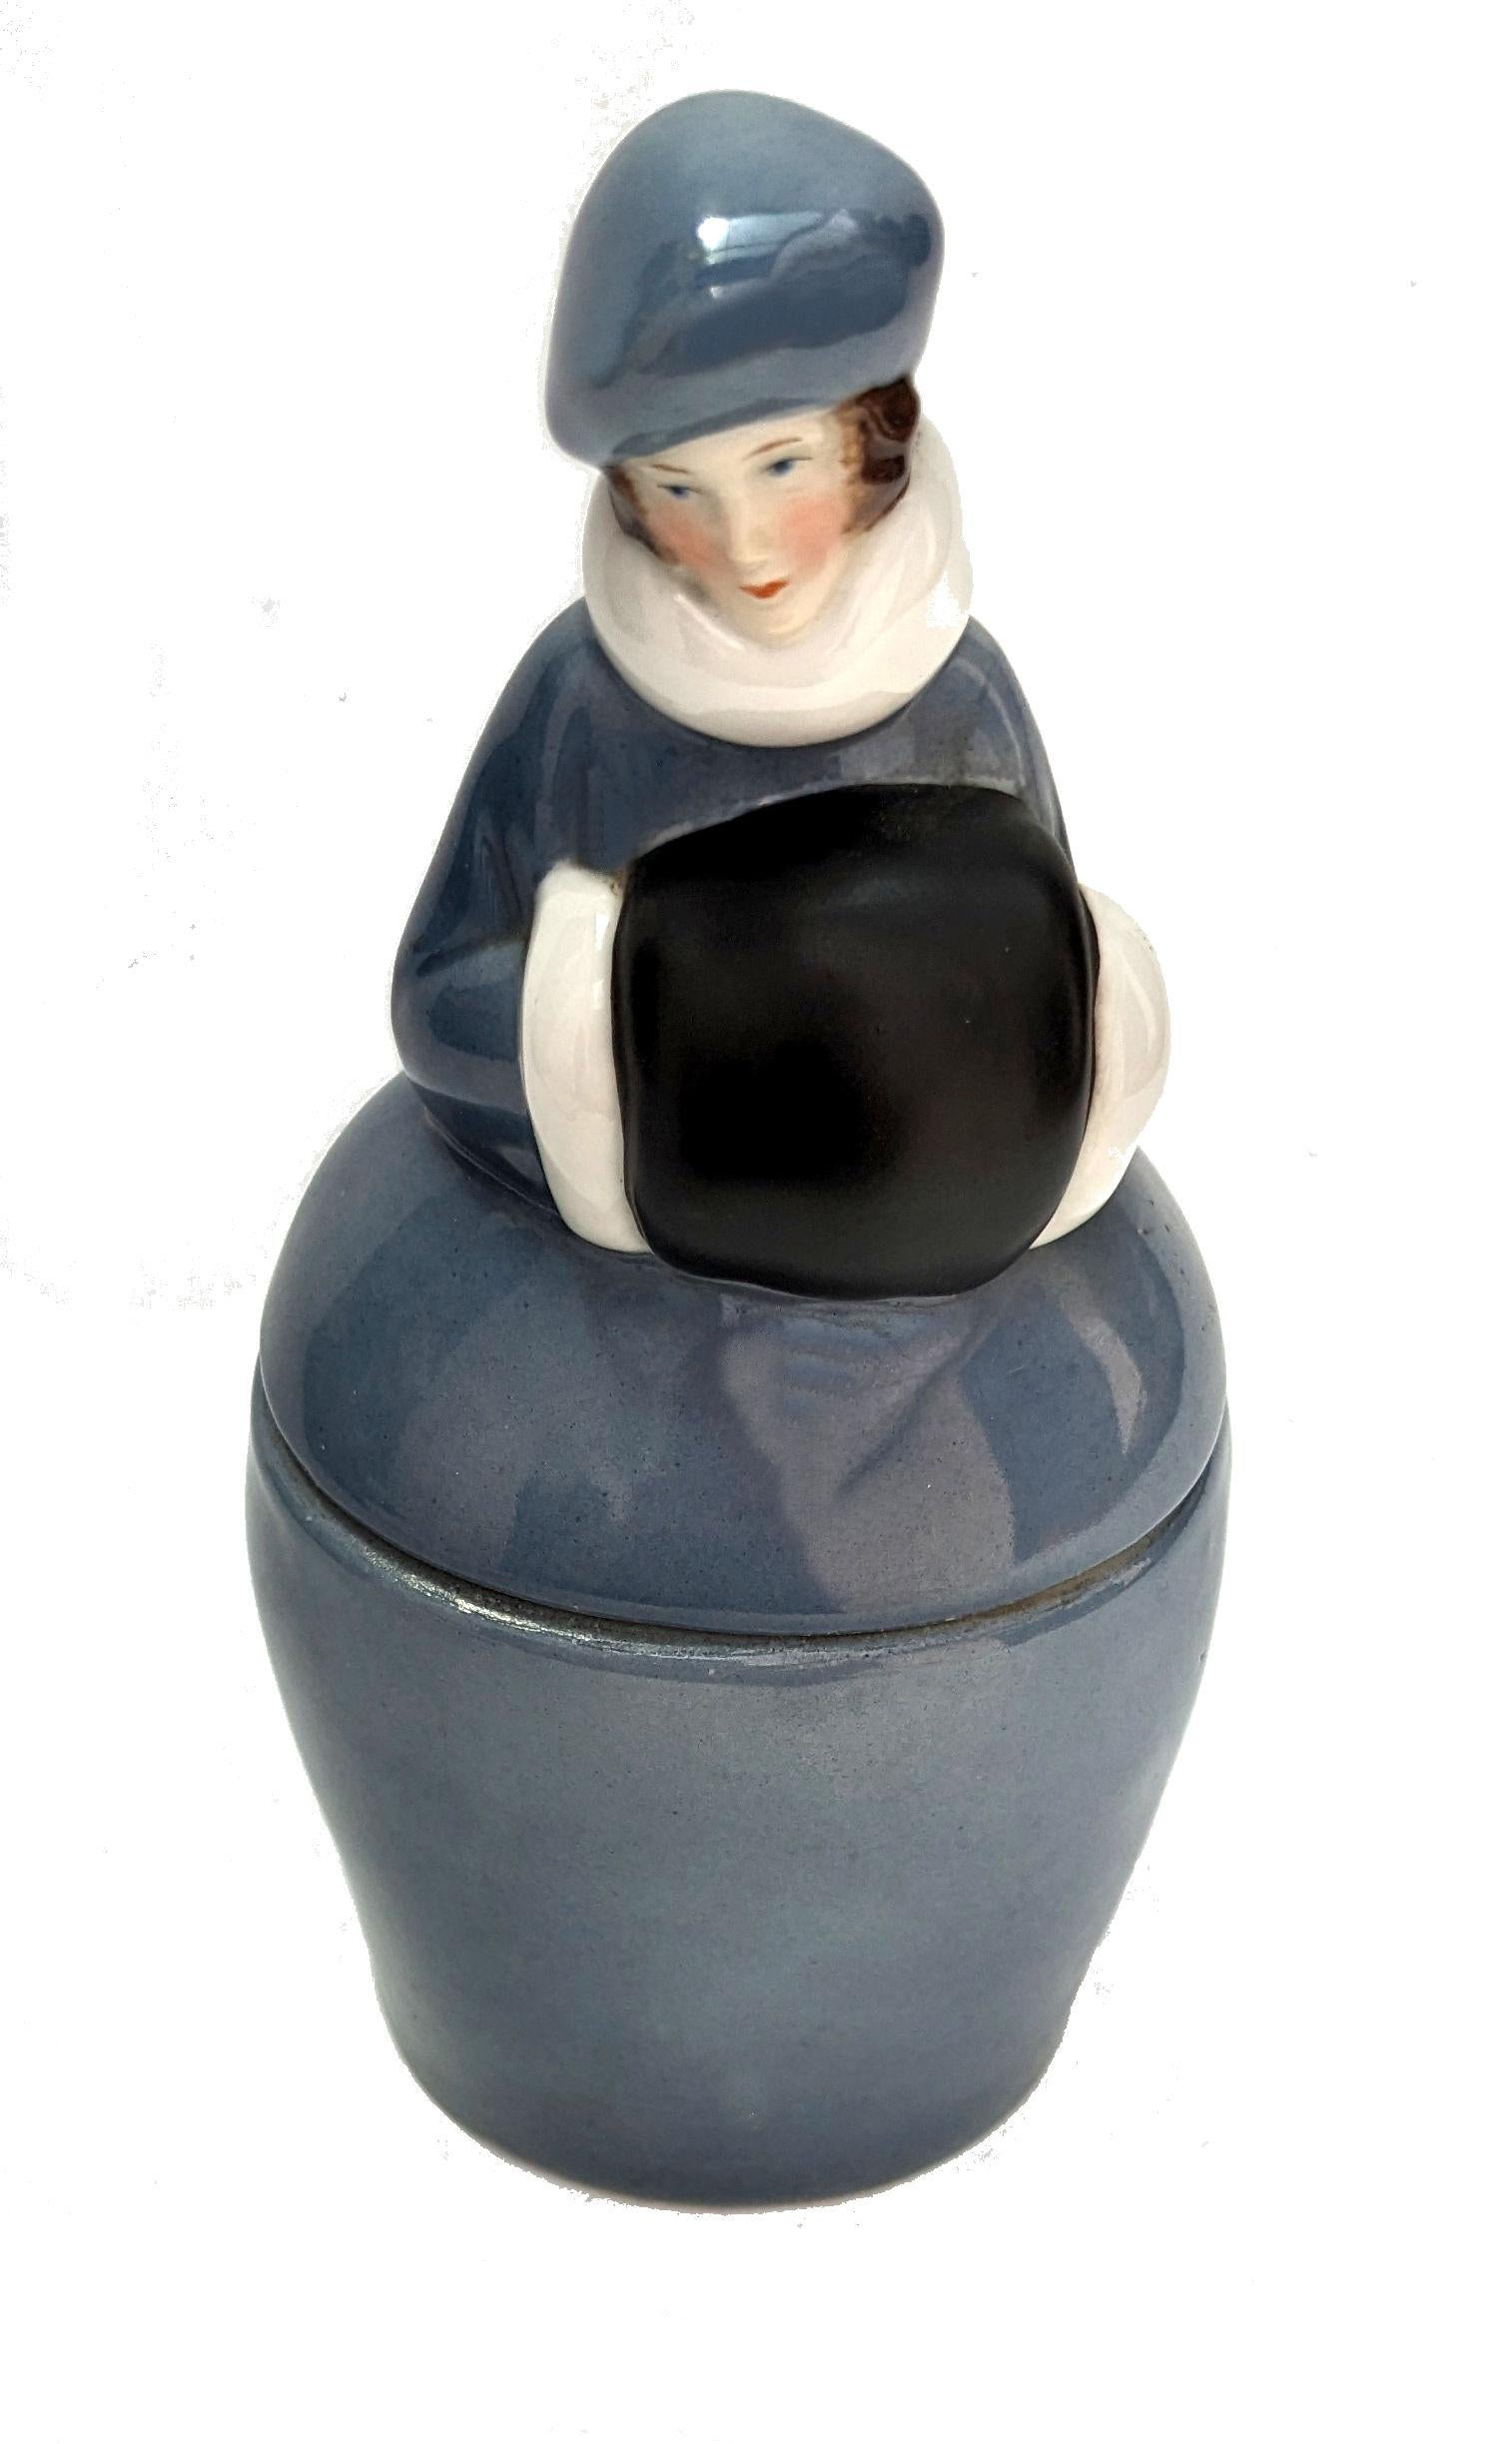 For your consideration is this very attractive and totally original 1930s Art deco ladies powder/ trinket box. The top half of the container is in the form of a 1930's flapper girl with her crimped bob haircut and delicately and expertly painted